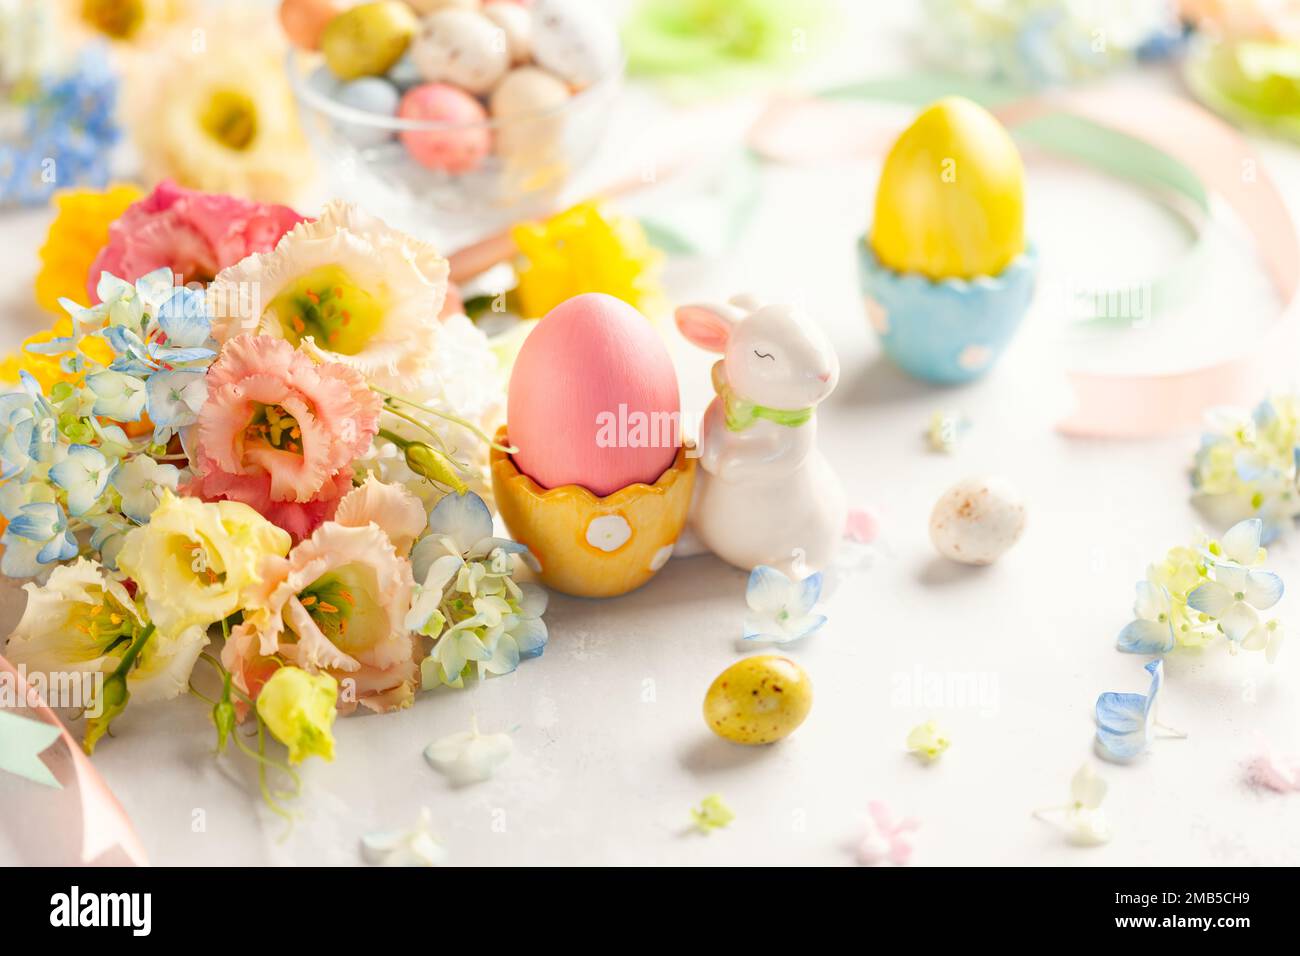 Happy Easter background with colorful eggs, candy and bunch of flowers. Table decorating for holiday. Stock Photo